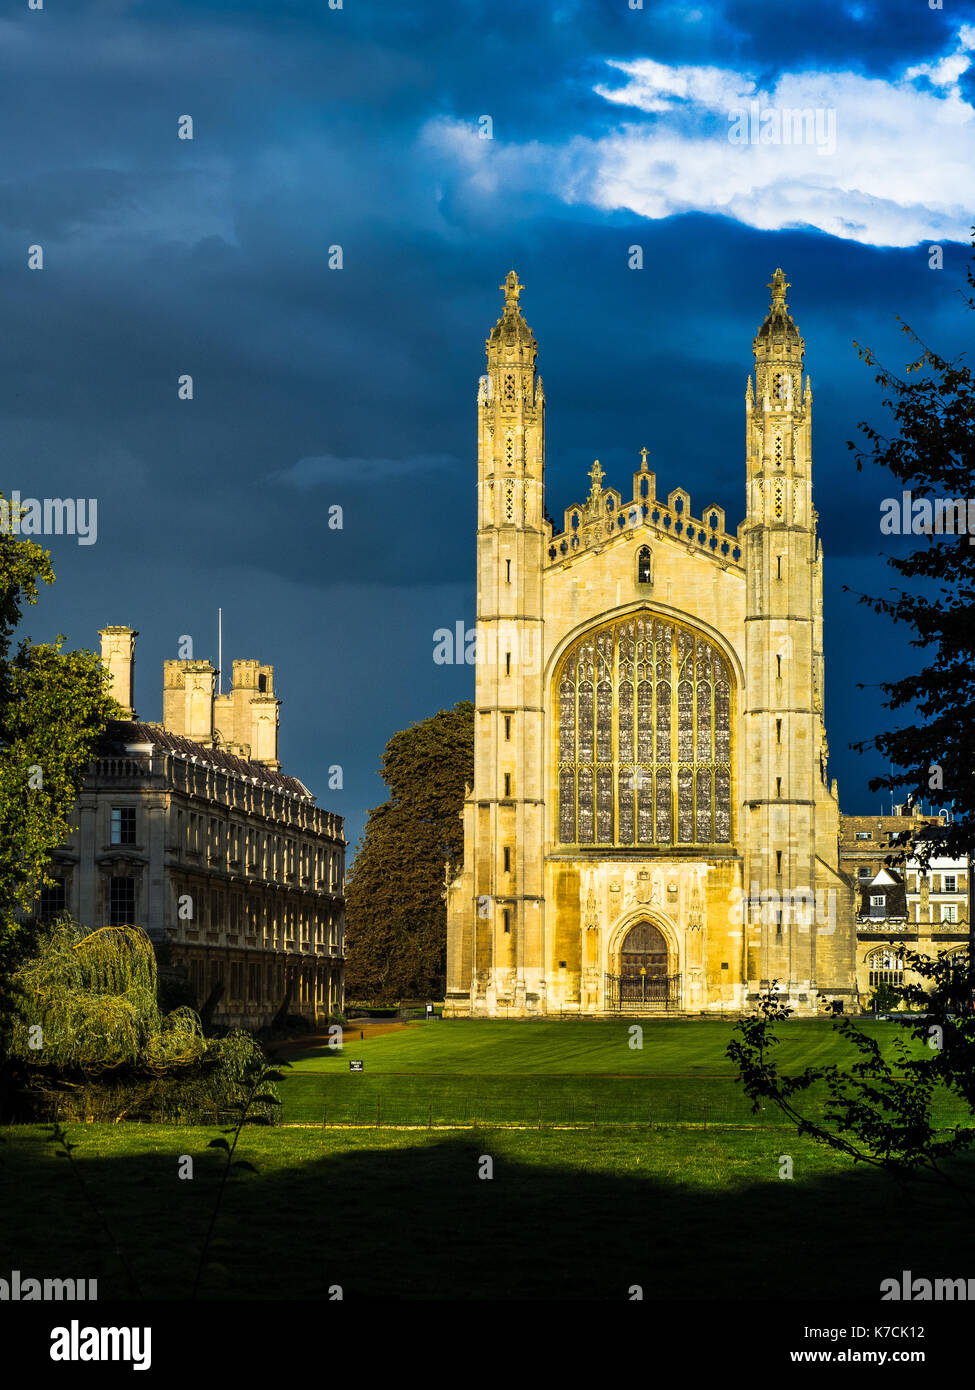 Cambridge Tourism Kings College Chapel glows in the Sunset. The chapel, built between 1446 to 1515, is part of Kings College, Unversity of Cambridge Stock Photo